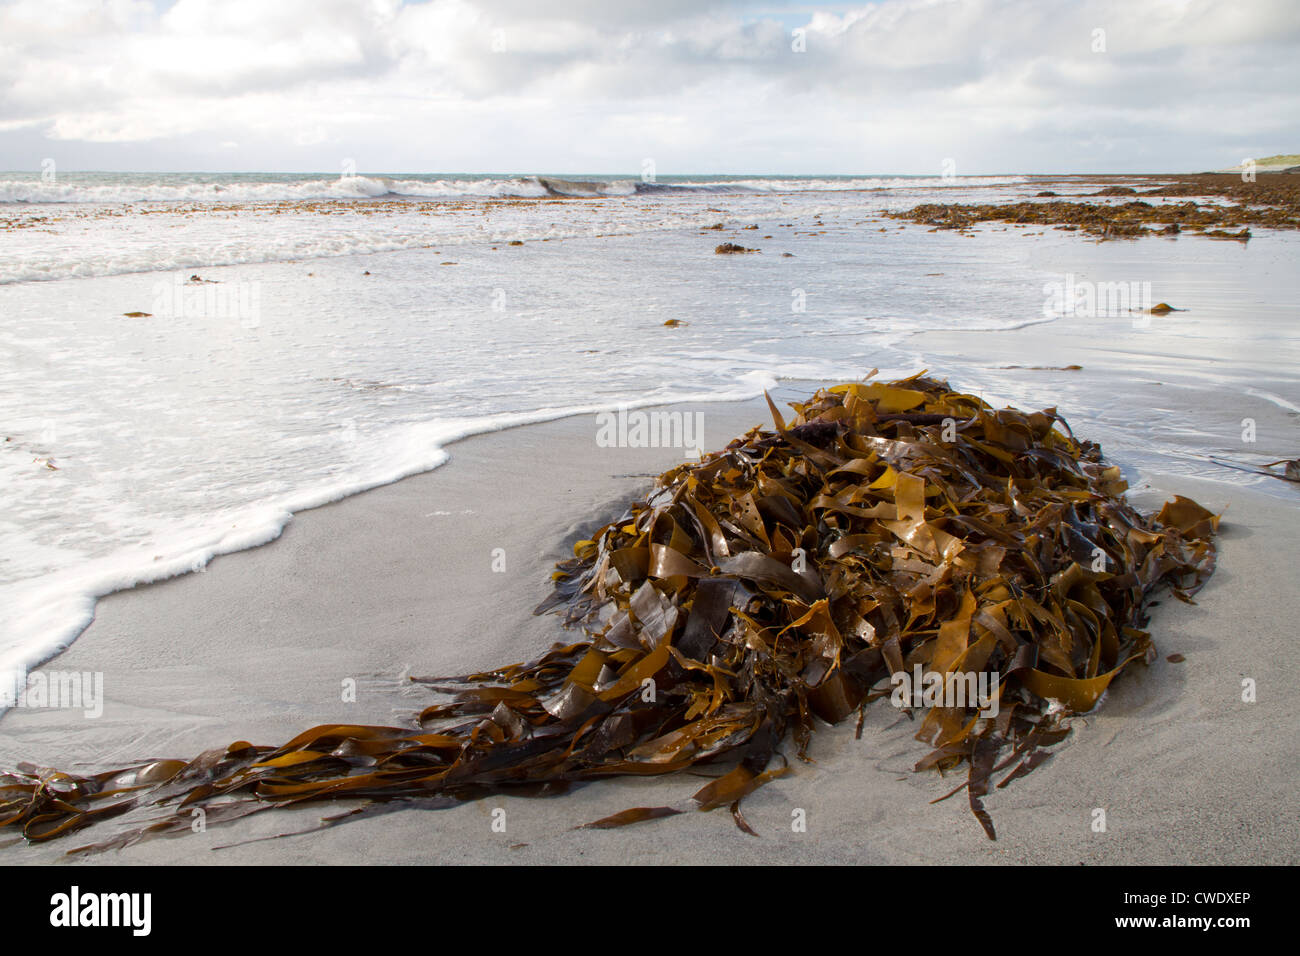 Sea weed washed up on a beach. Stock Photo